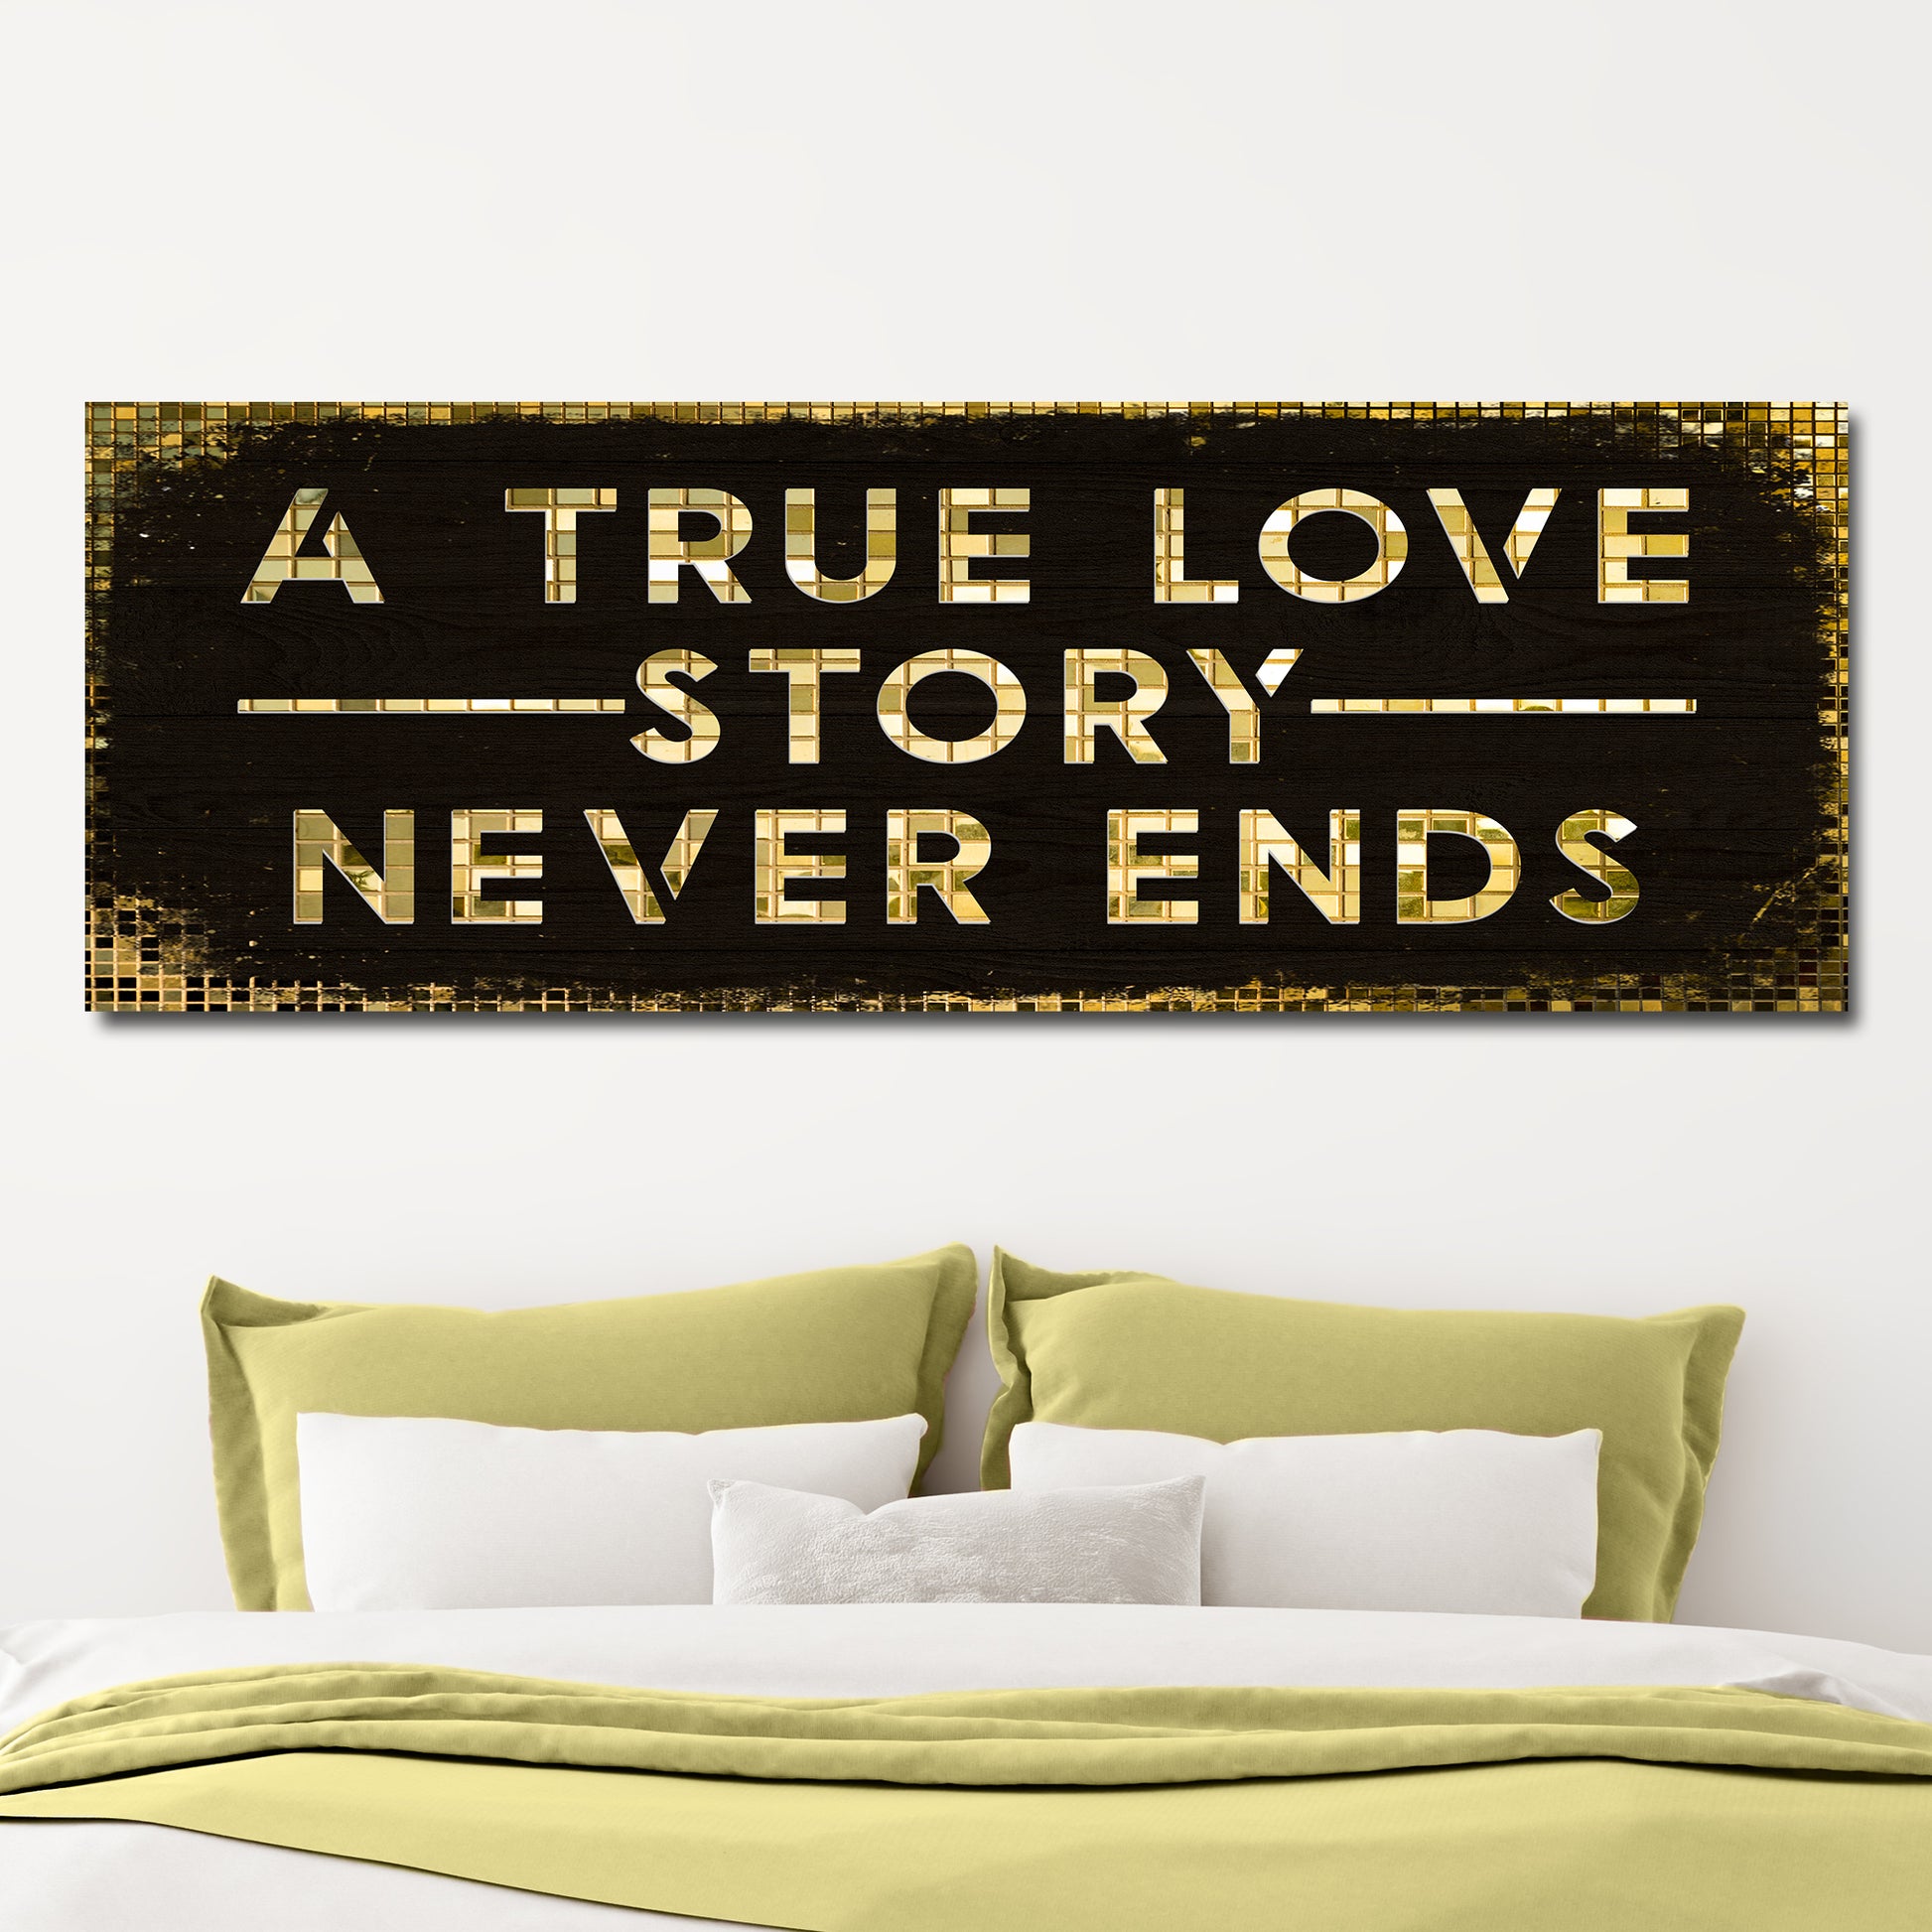 A True Love Story Never Ends Sign  - Image by Tailored Canvases